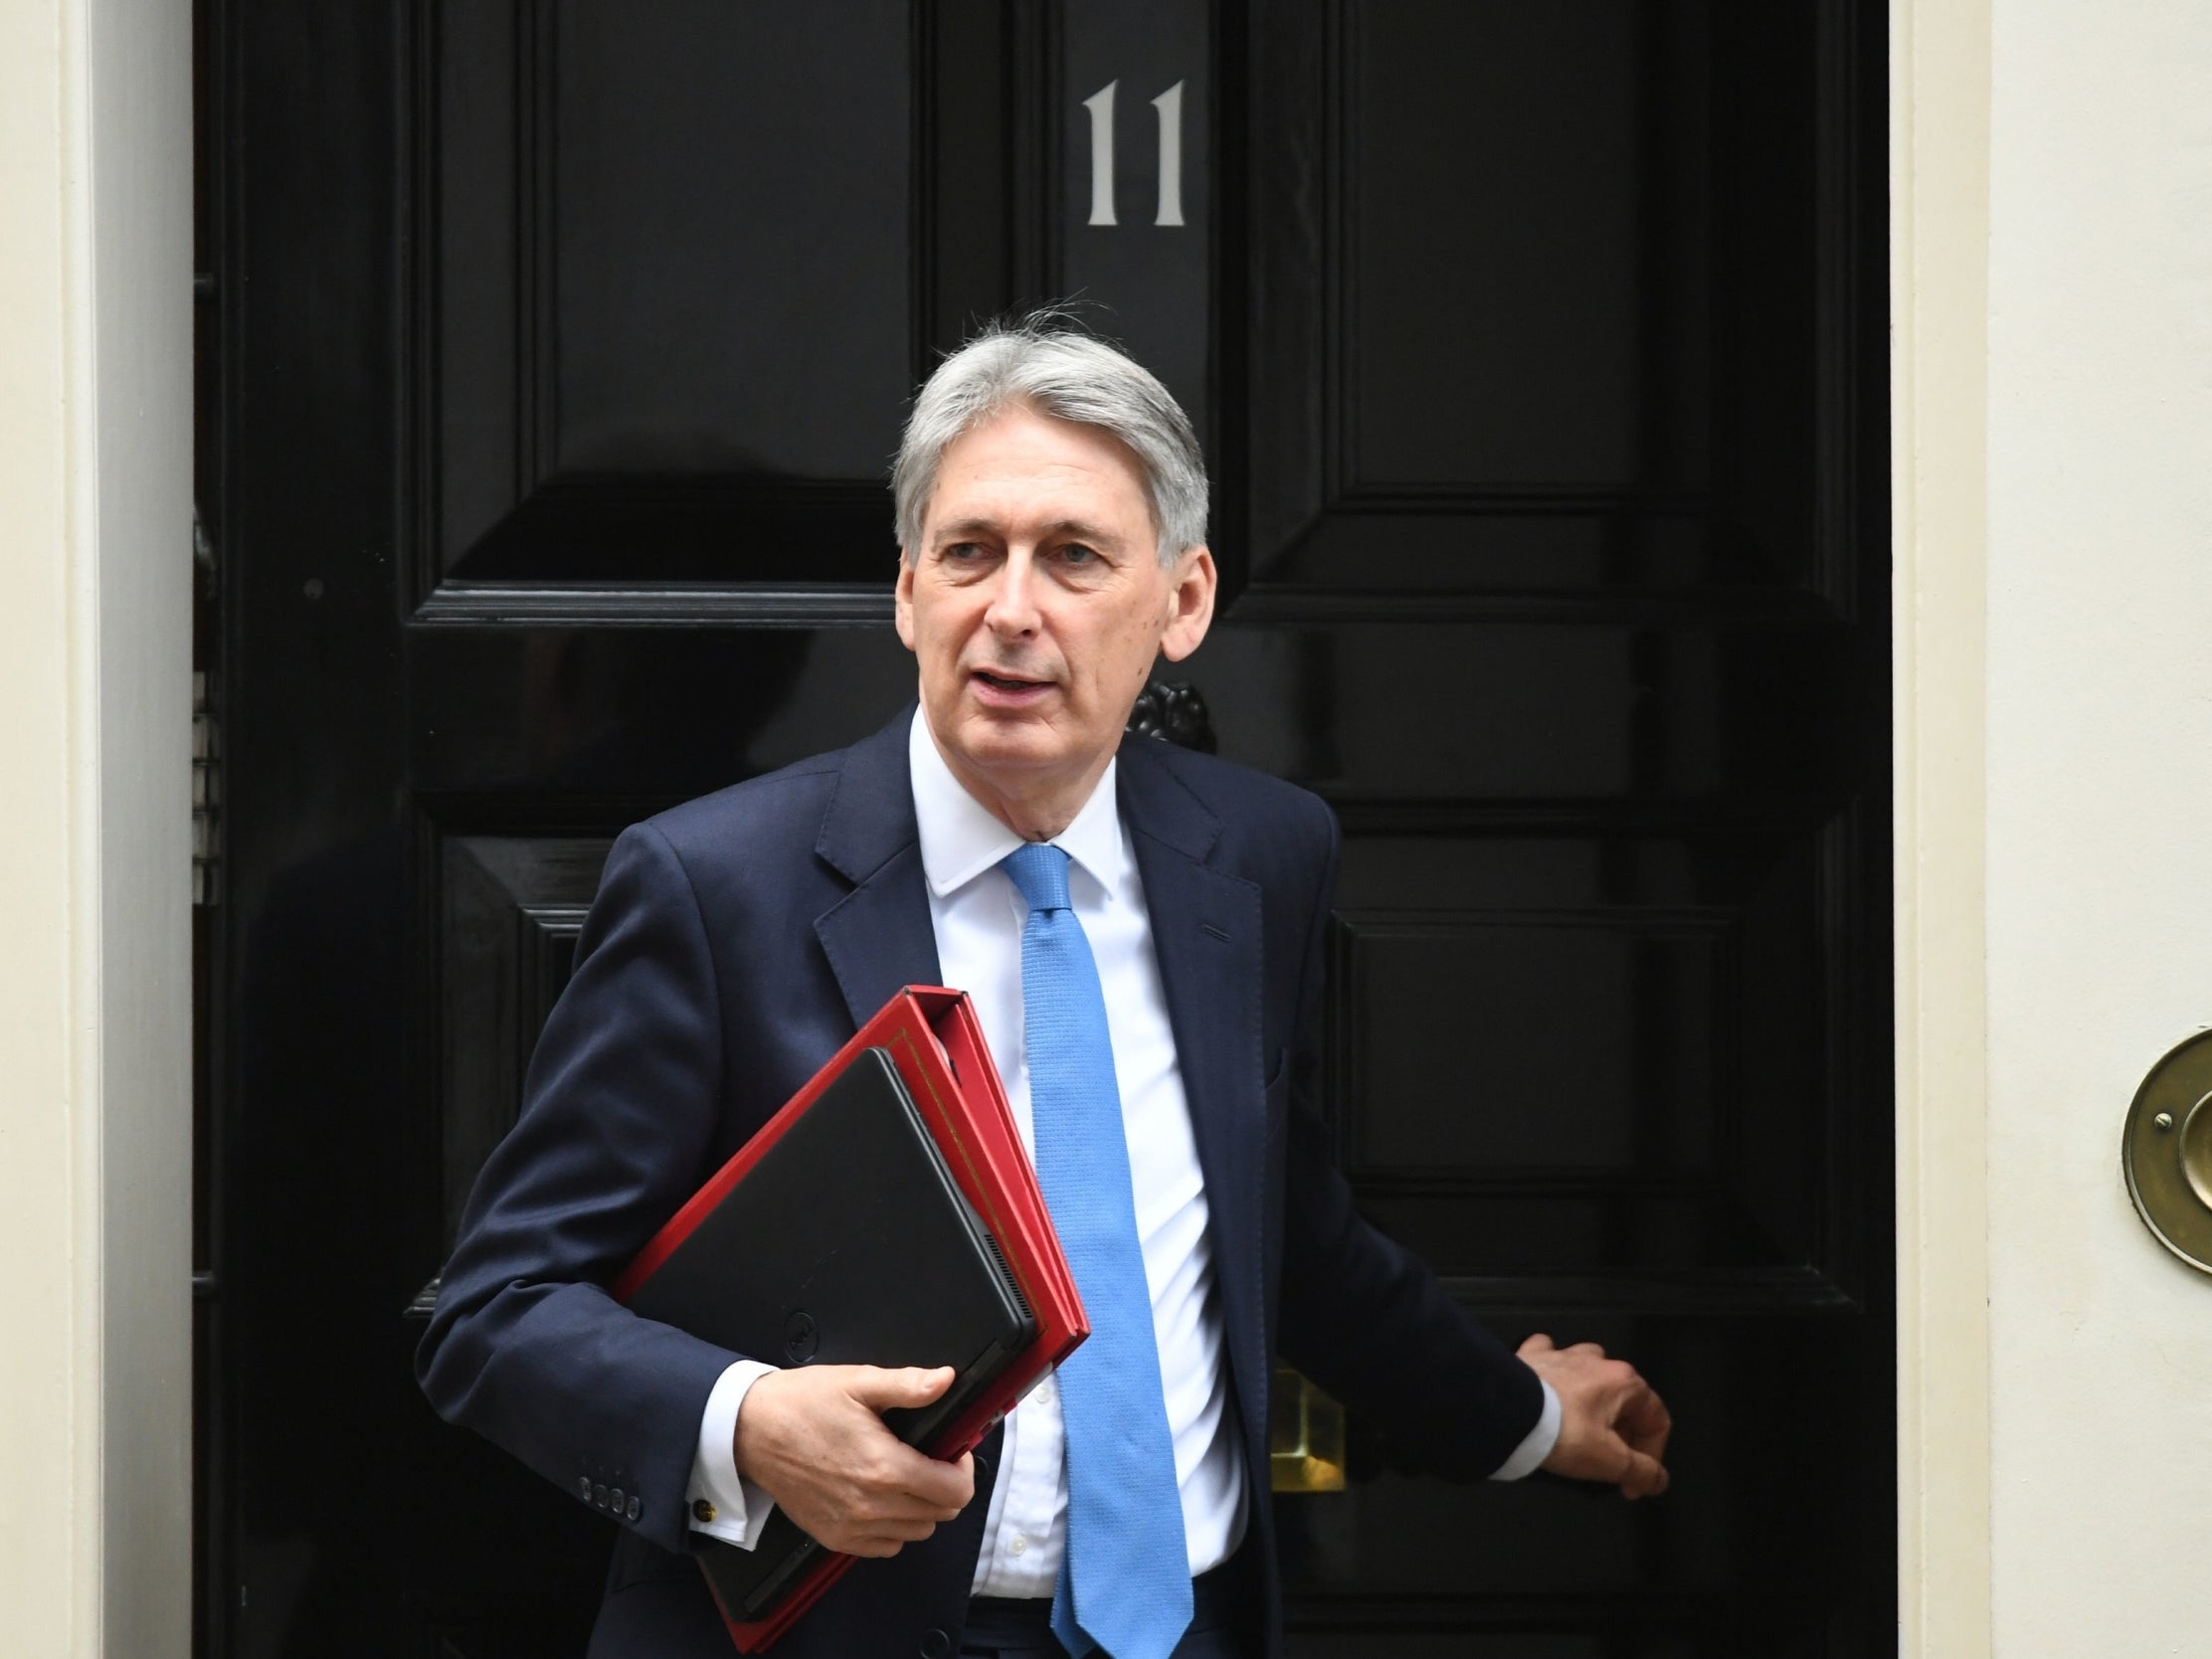 Philip Hammond claimed police budgets were rising